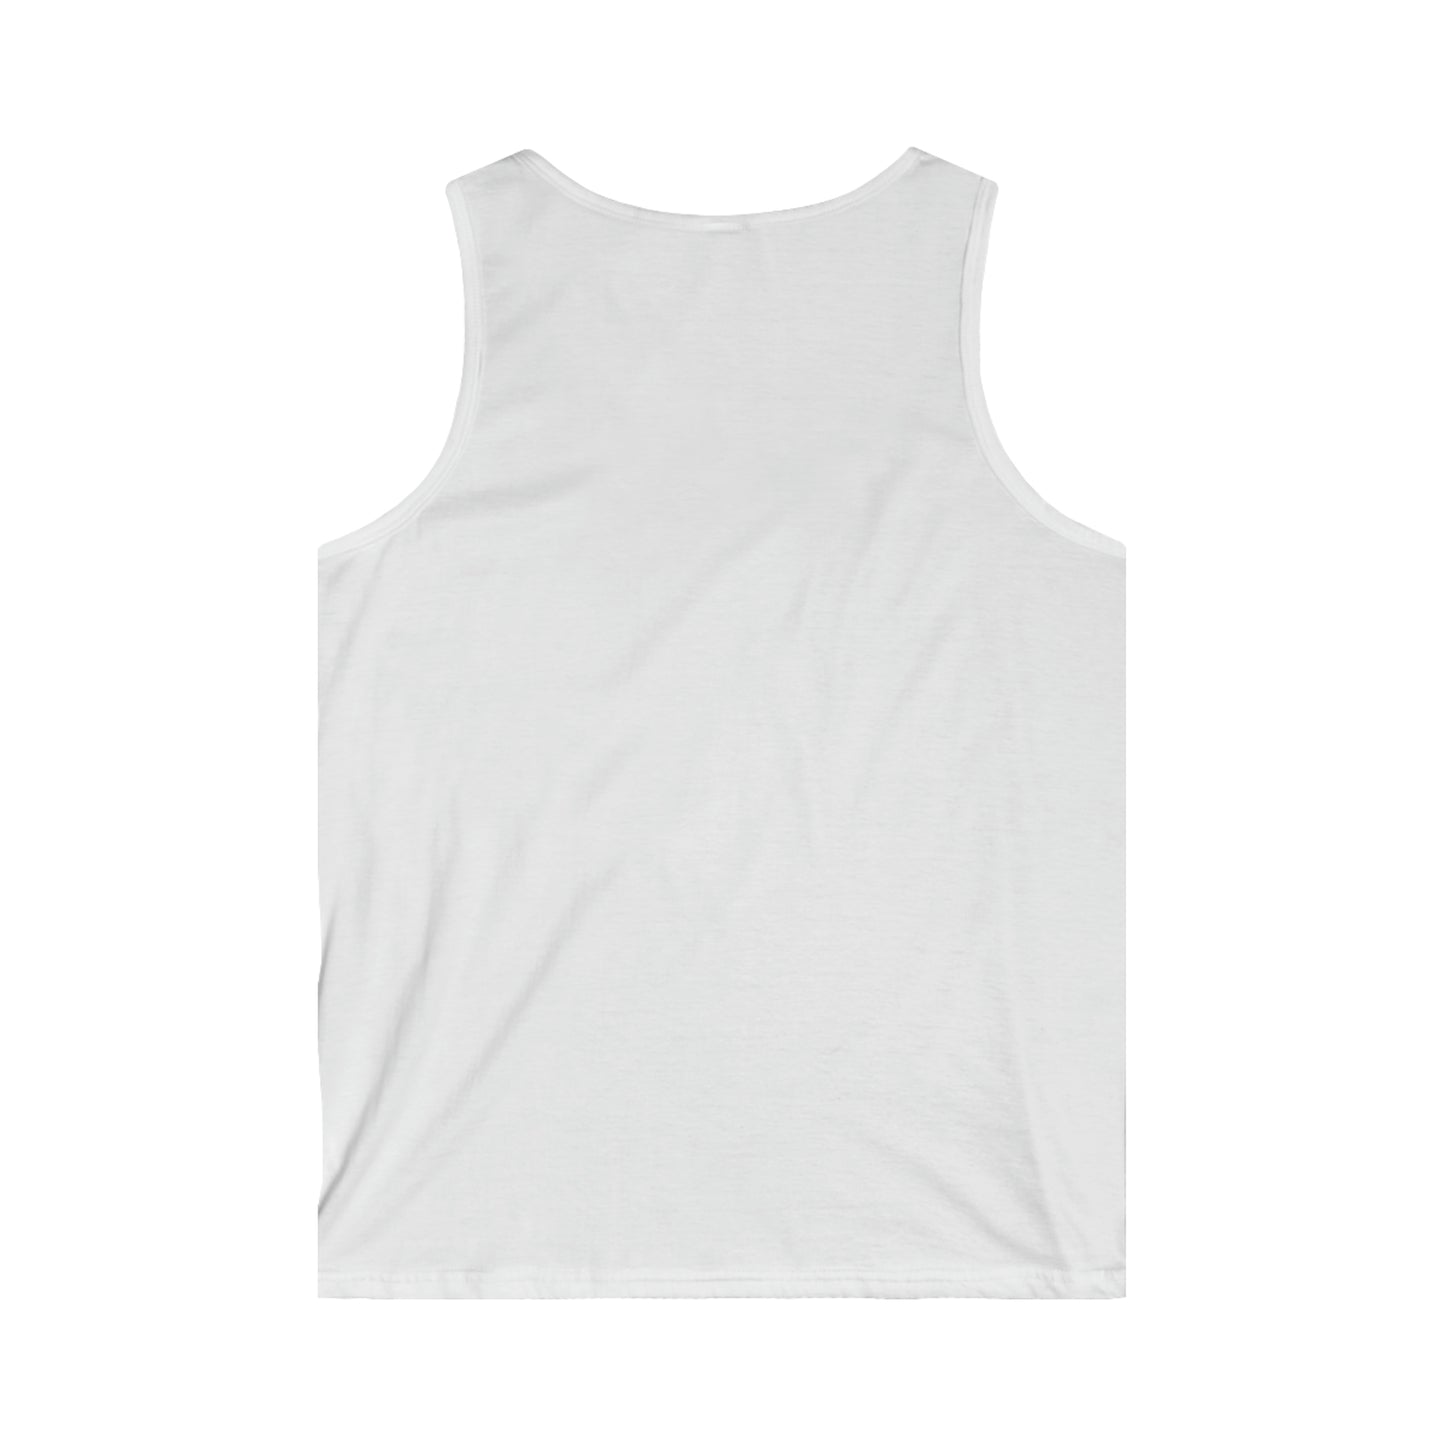 First They Came Men's Softstyle Tank Top